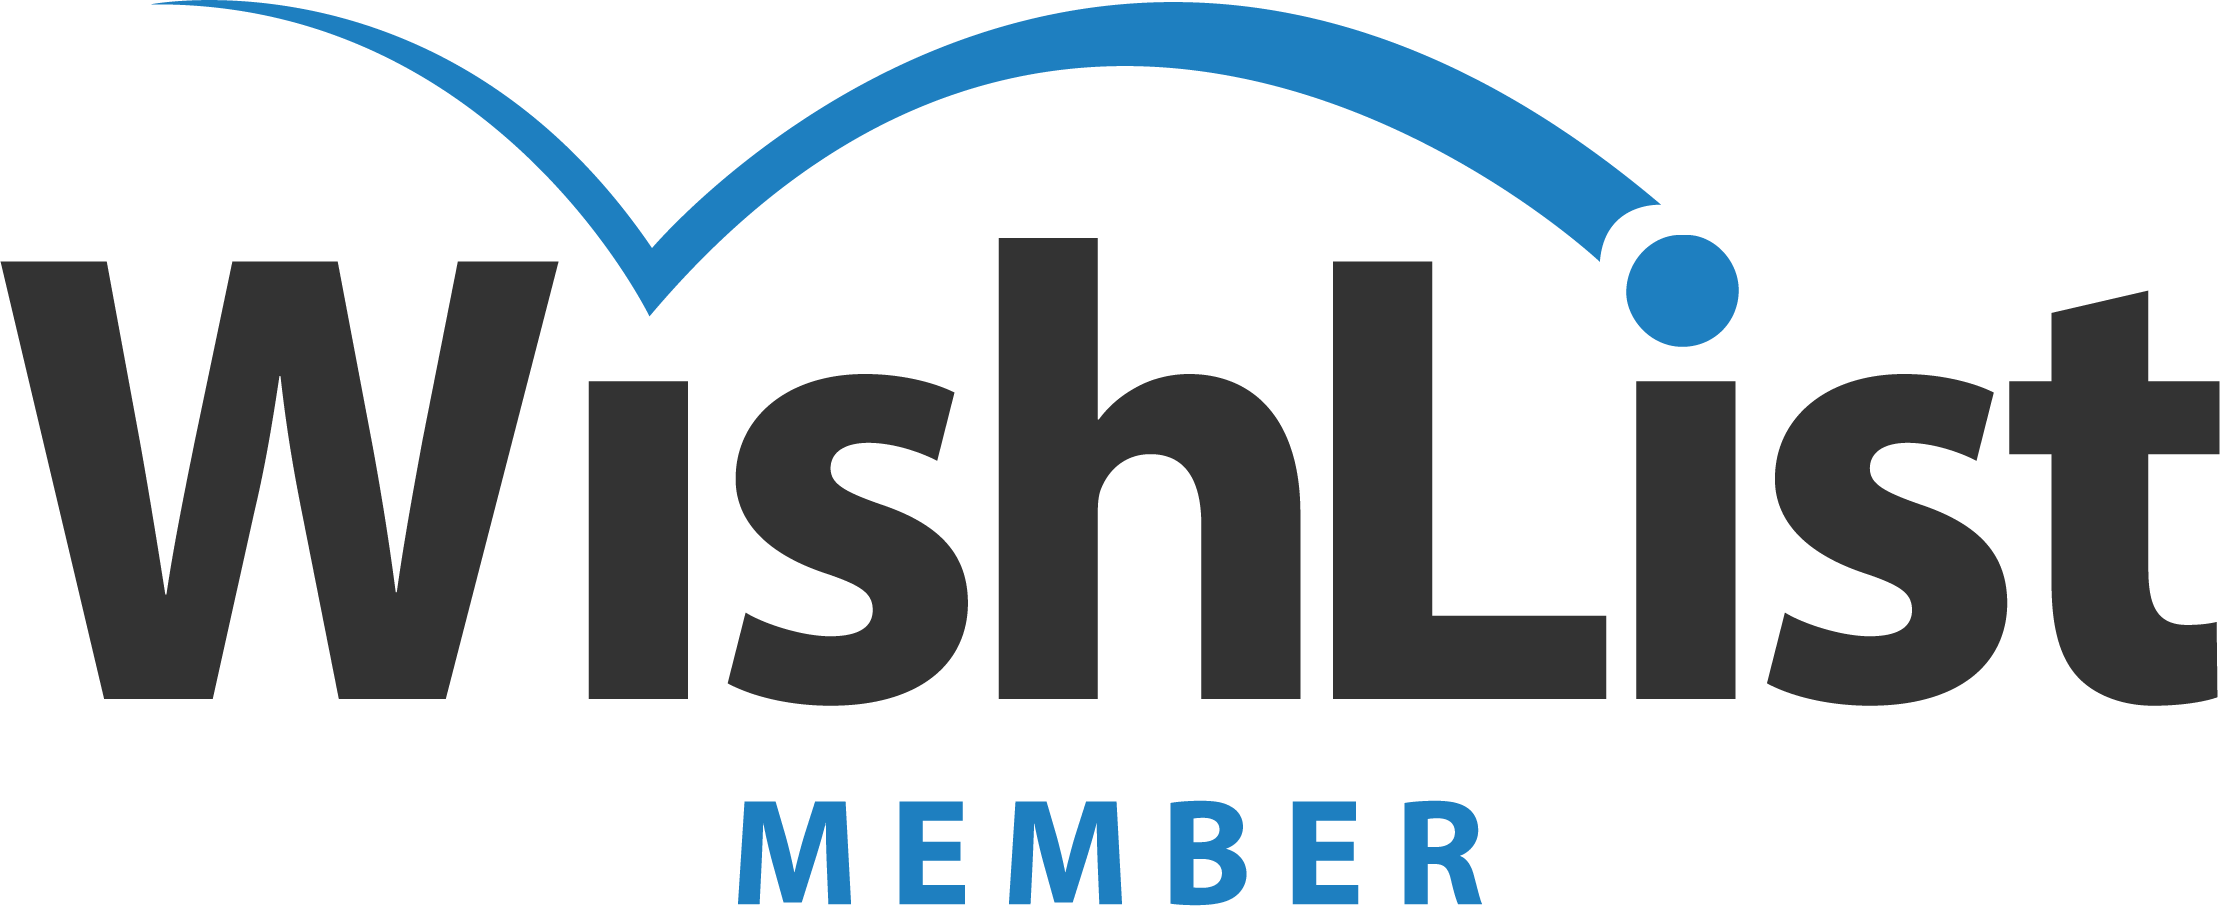 WishList Member - Protect your membership digital downloads, online courses & content.